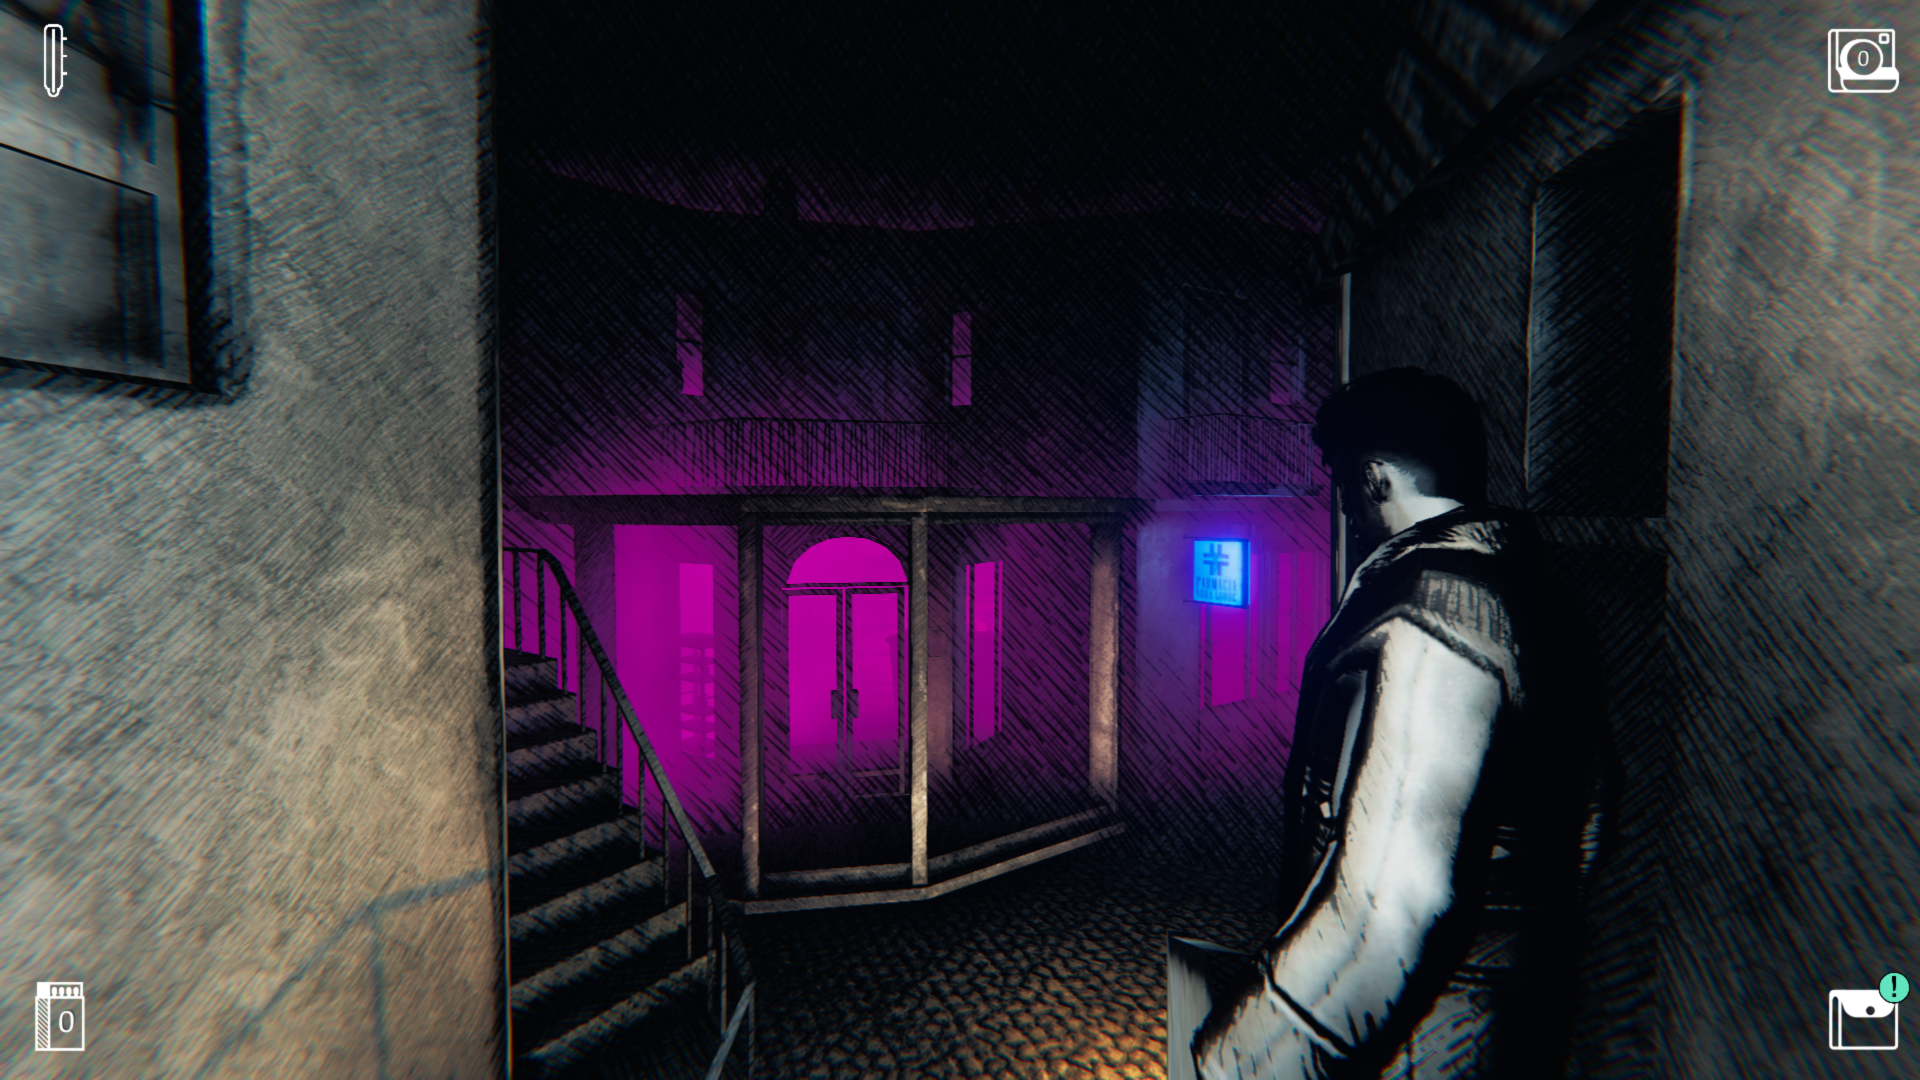 Saturnalia review - a man edges down a grey street lit in glowing pink